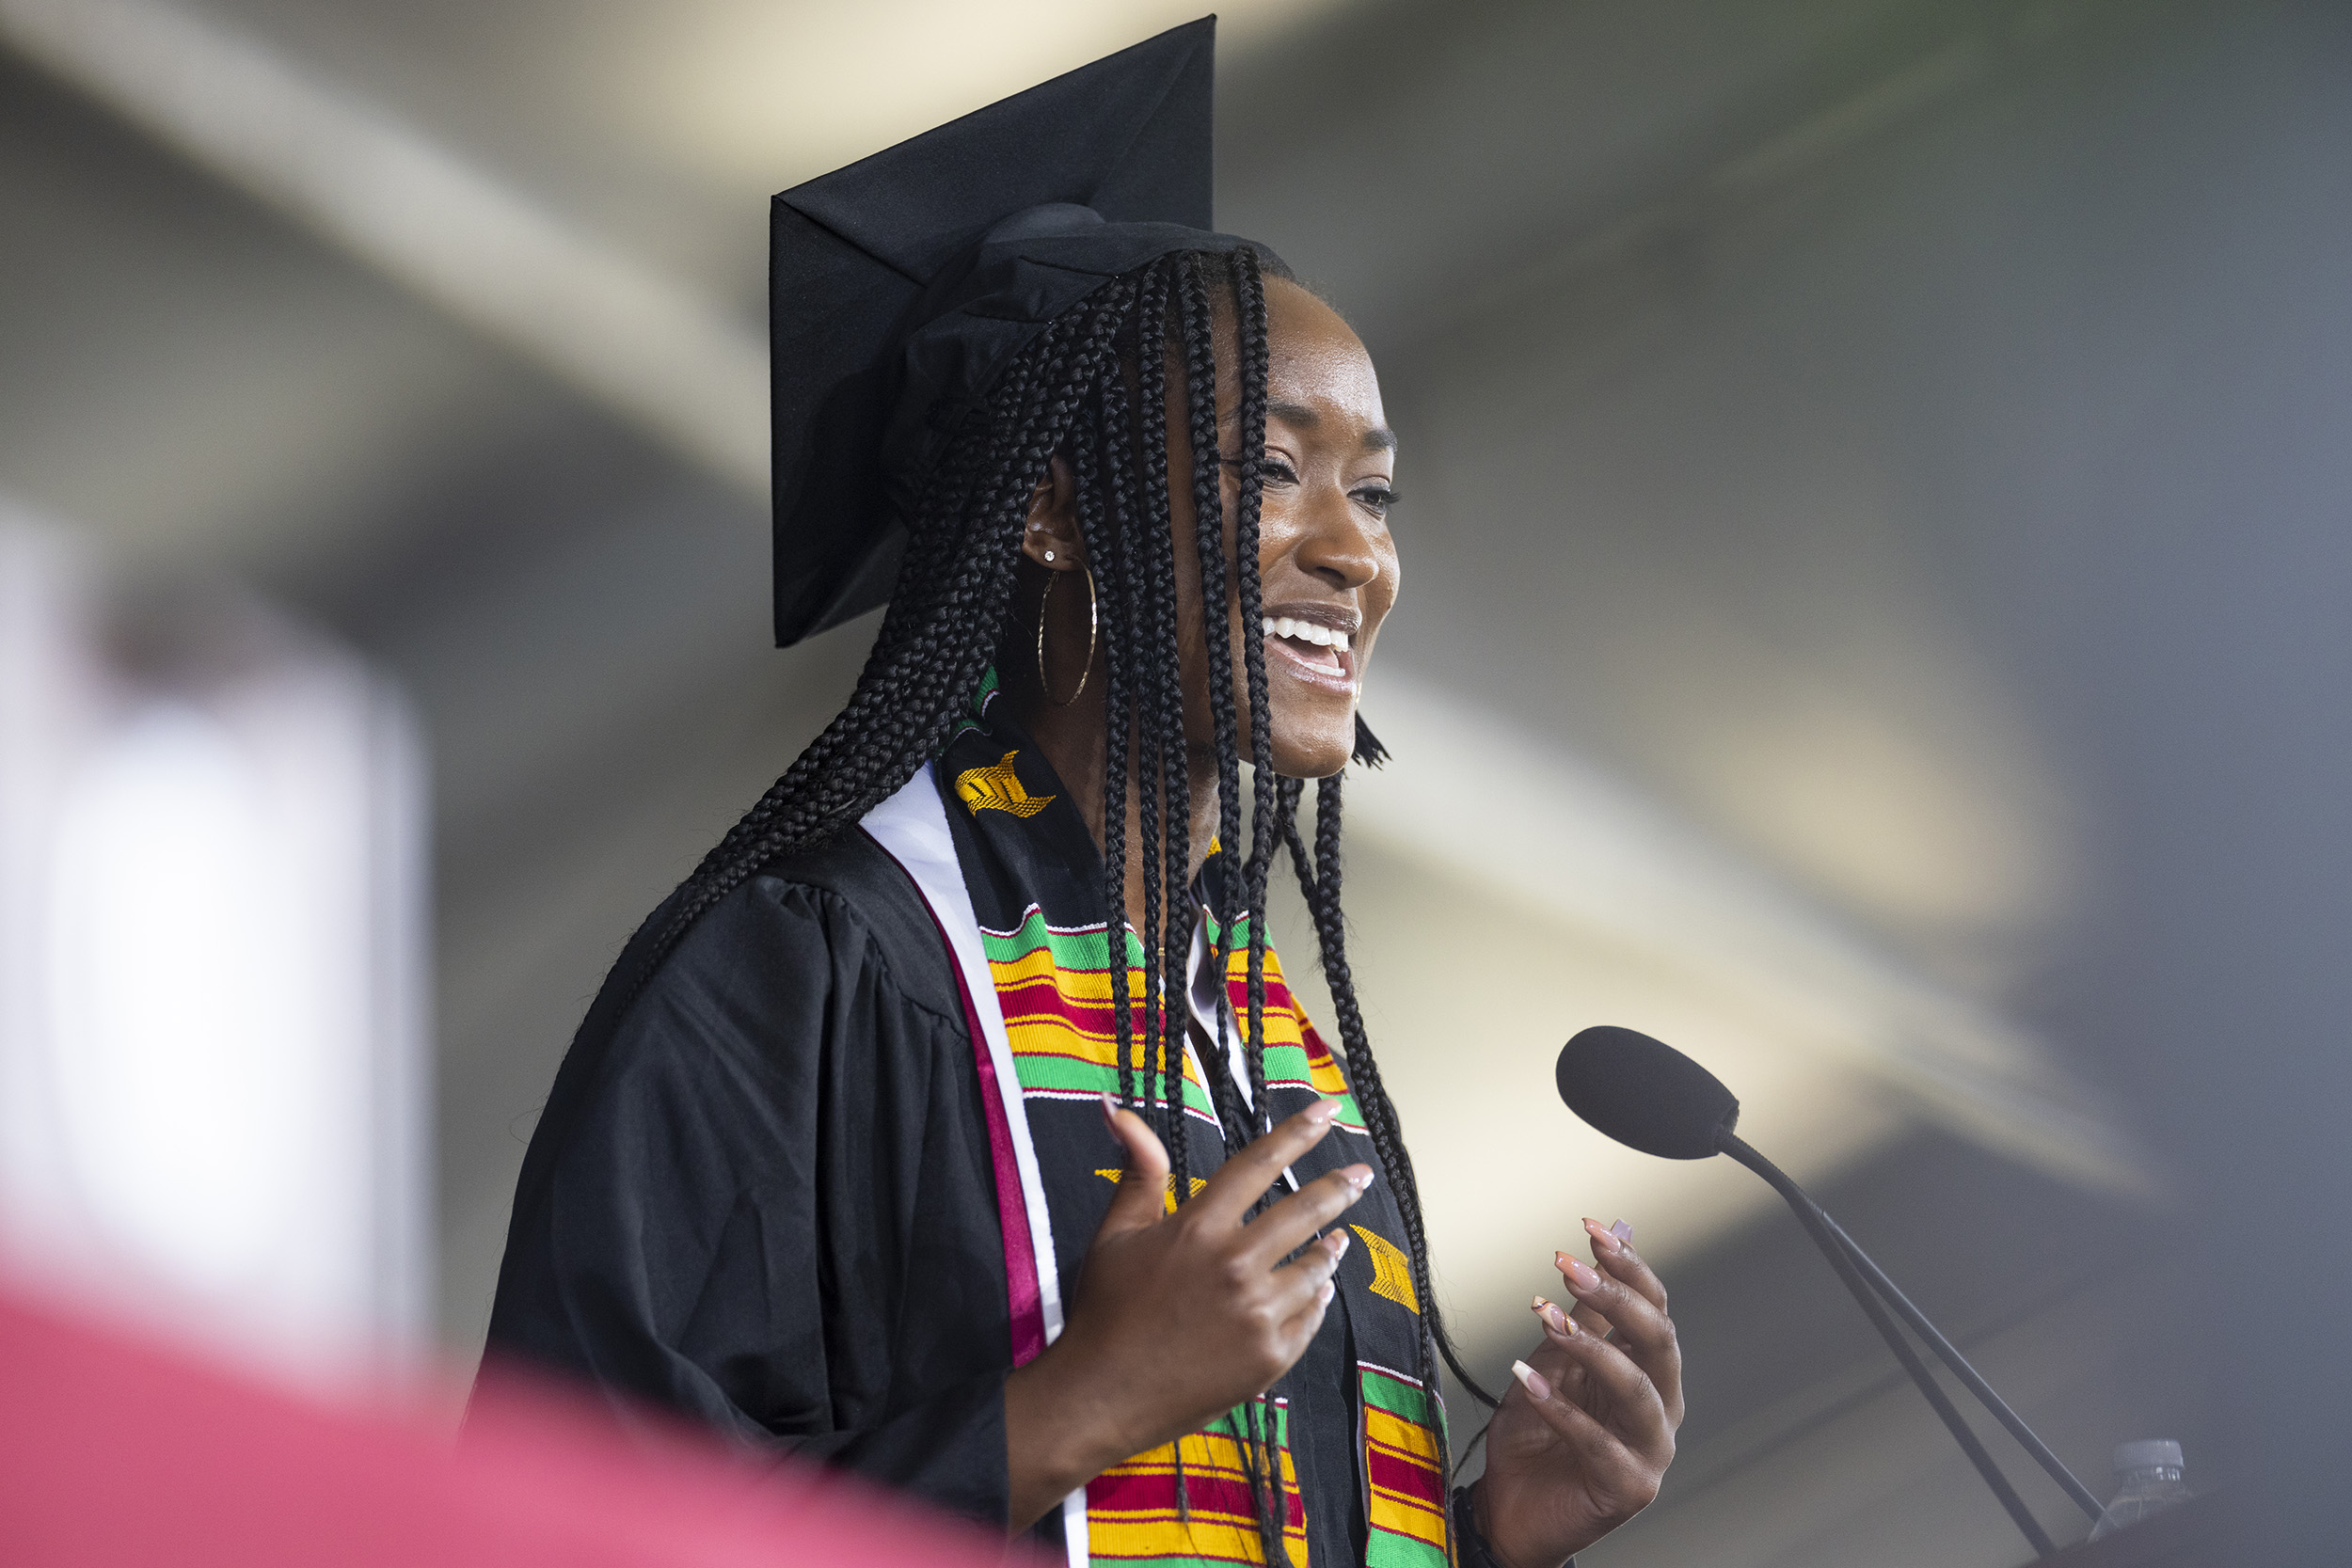 Class of 2020 class-elected speaker Maya Victoria-Rosetta Love ’20 at the commencement stage podium.